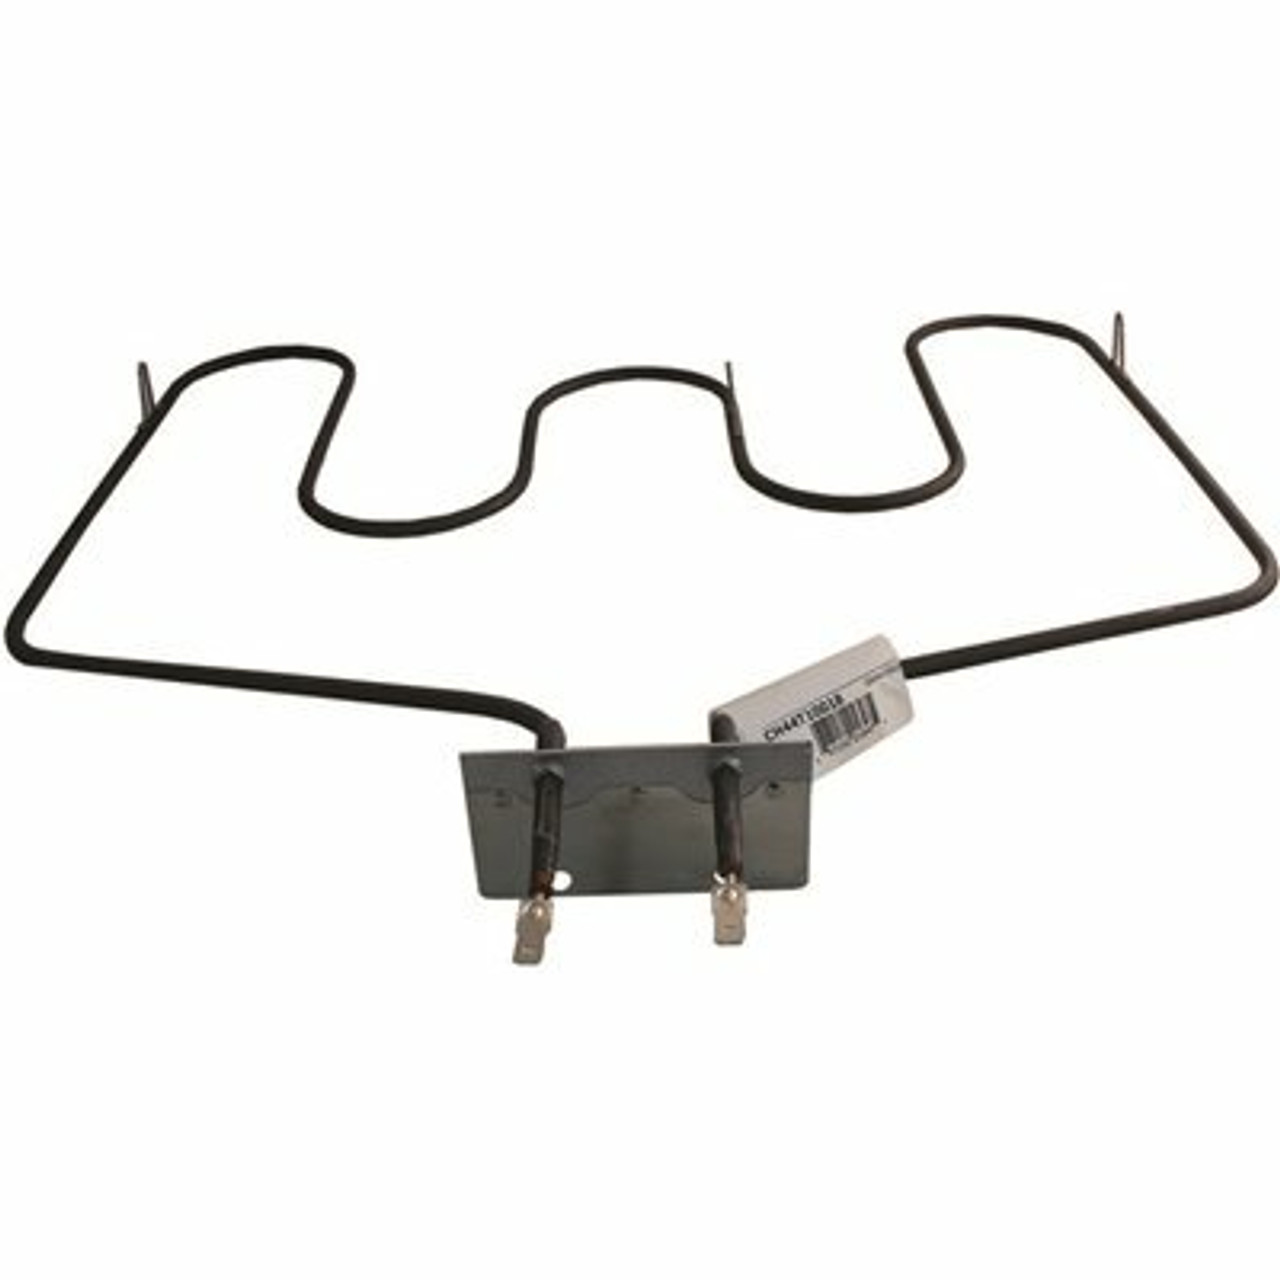 Supco Range Bake Element Replaces Wb44T10018